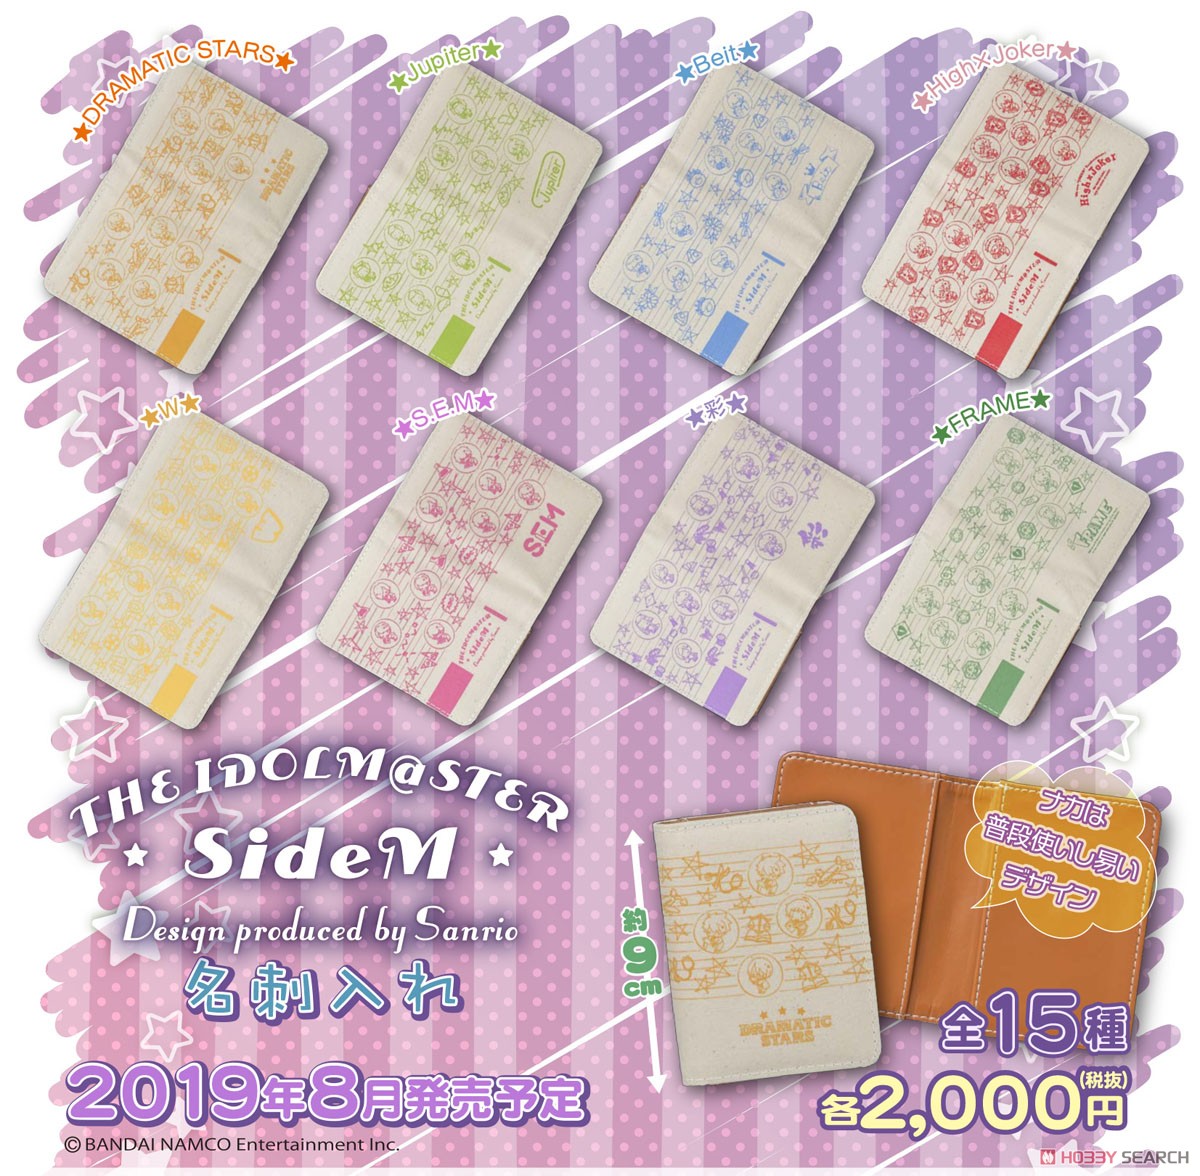 The Idolm@ster SideM Design Produced by Sanrio Card Case S.E.M (Anime Toy) Other picture1